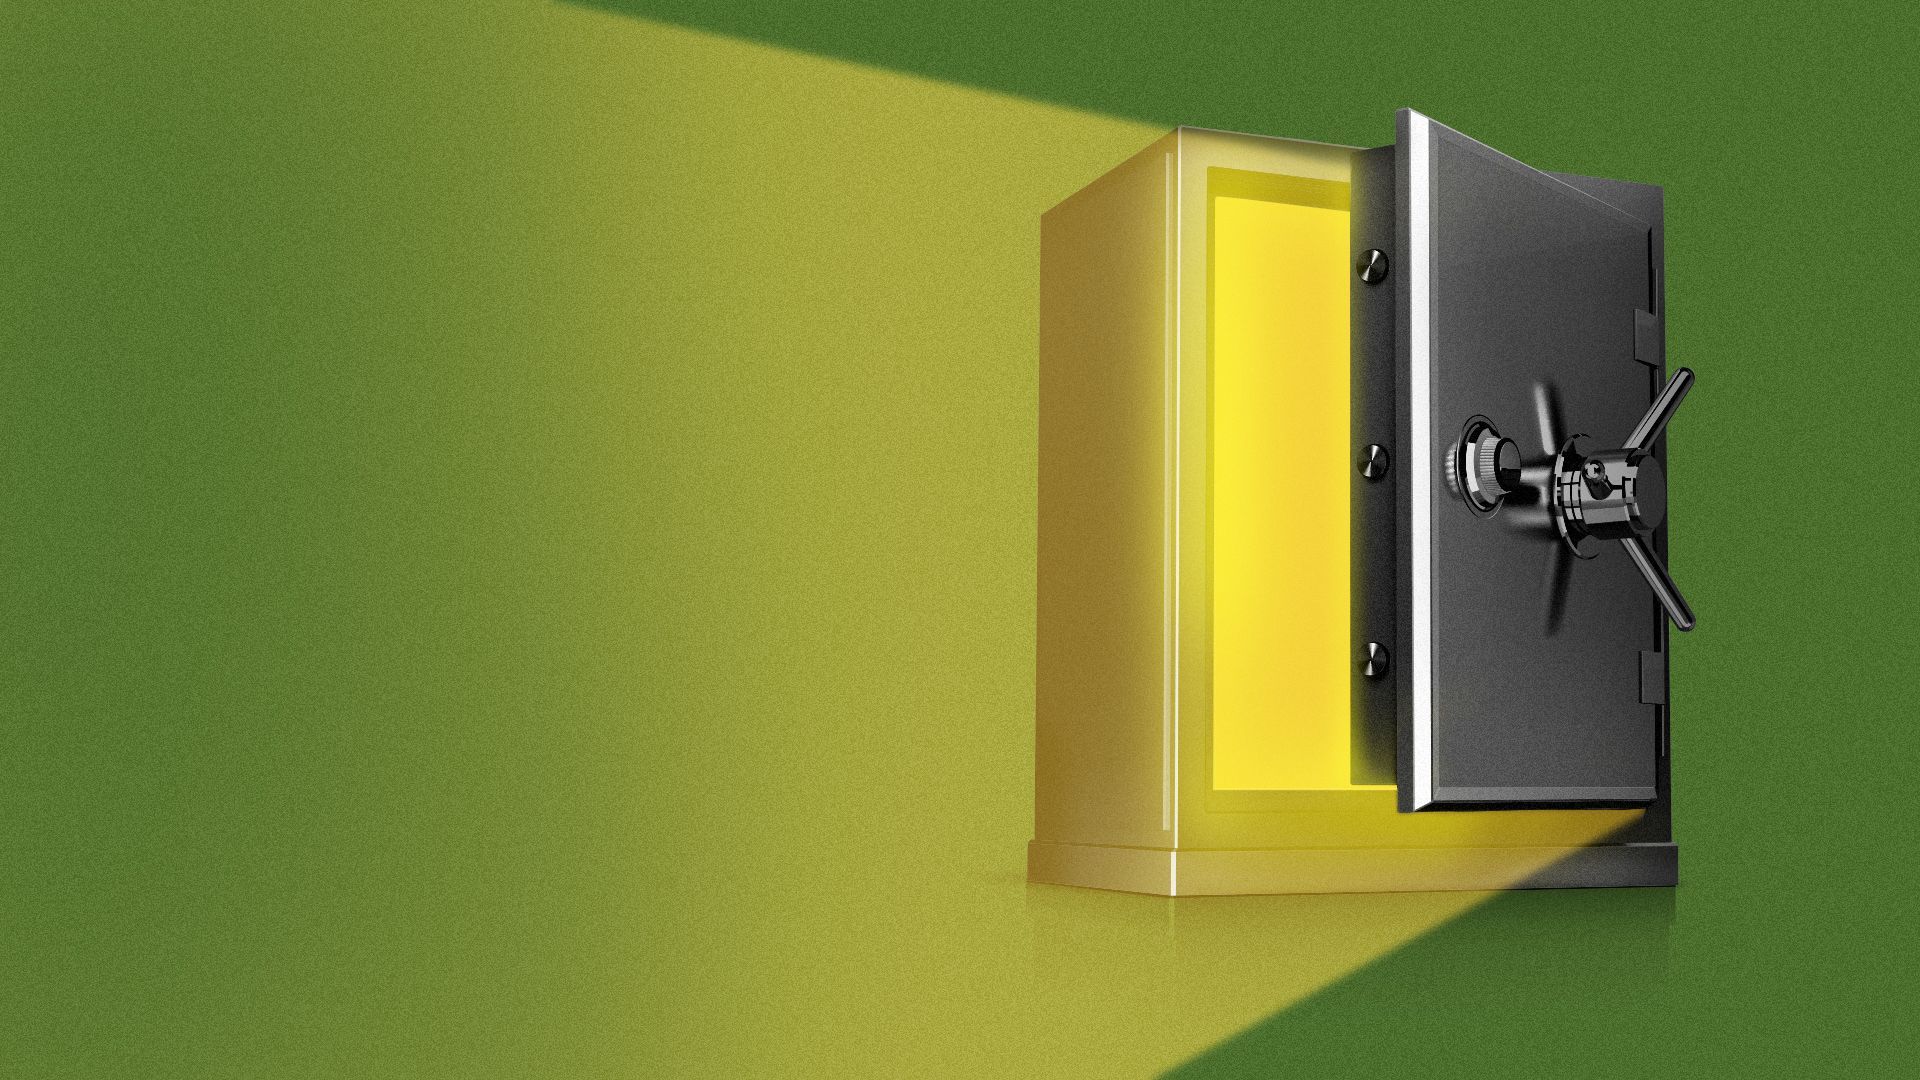 Illustration of light streaming out of an open safe.